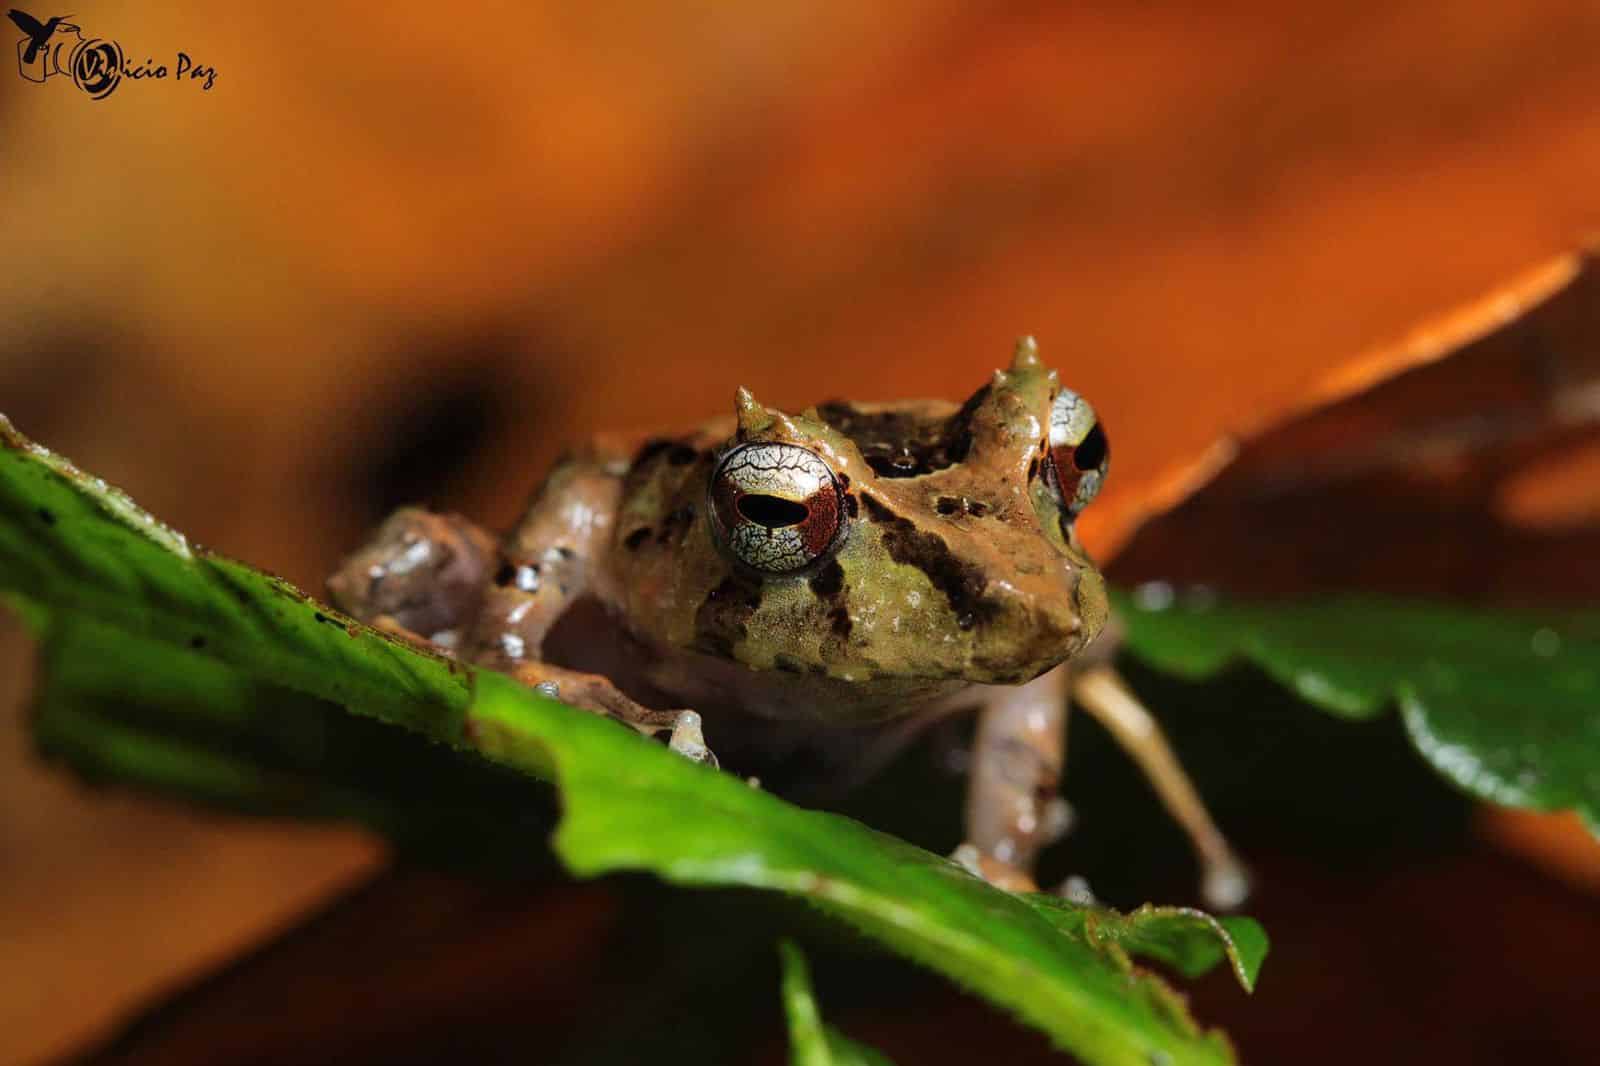 Pinocchio Rainfrog with mottled brown and black skin and huge, glass-like eyes